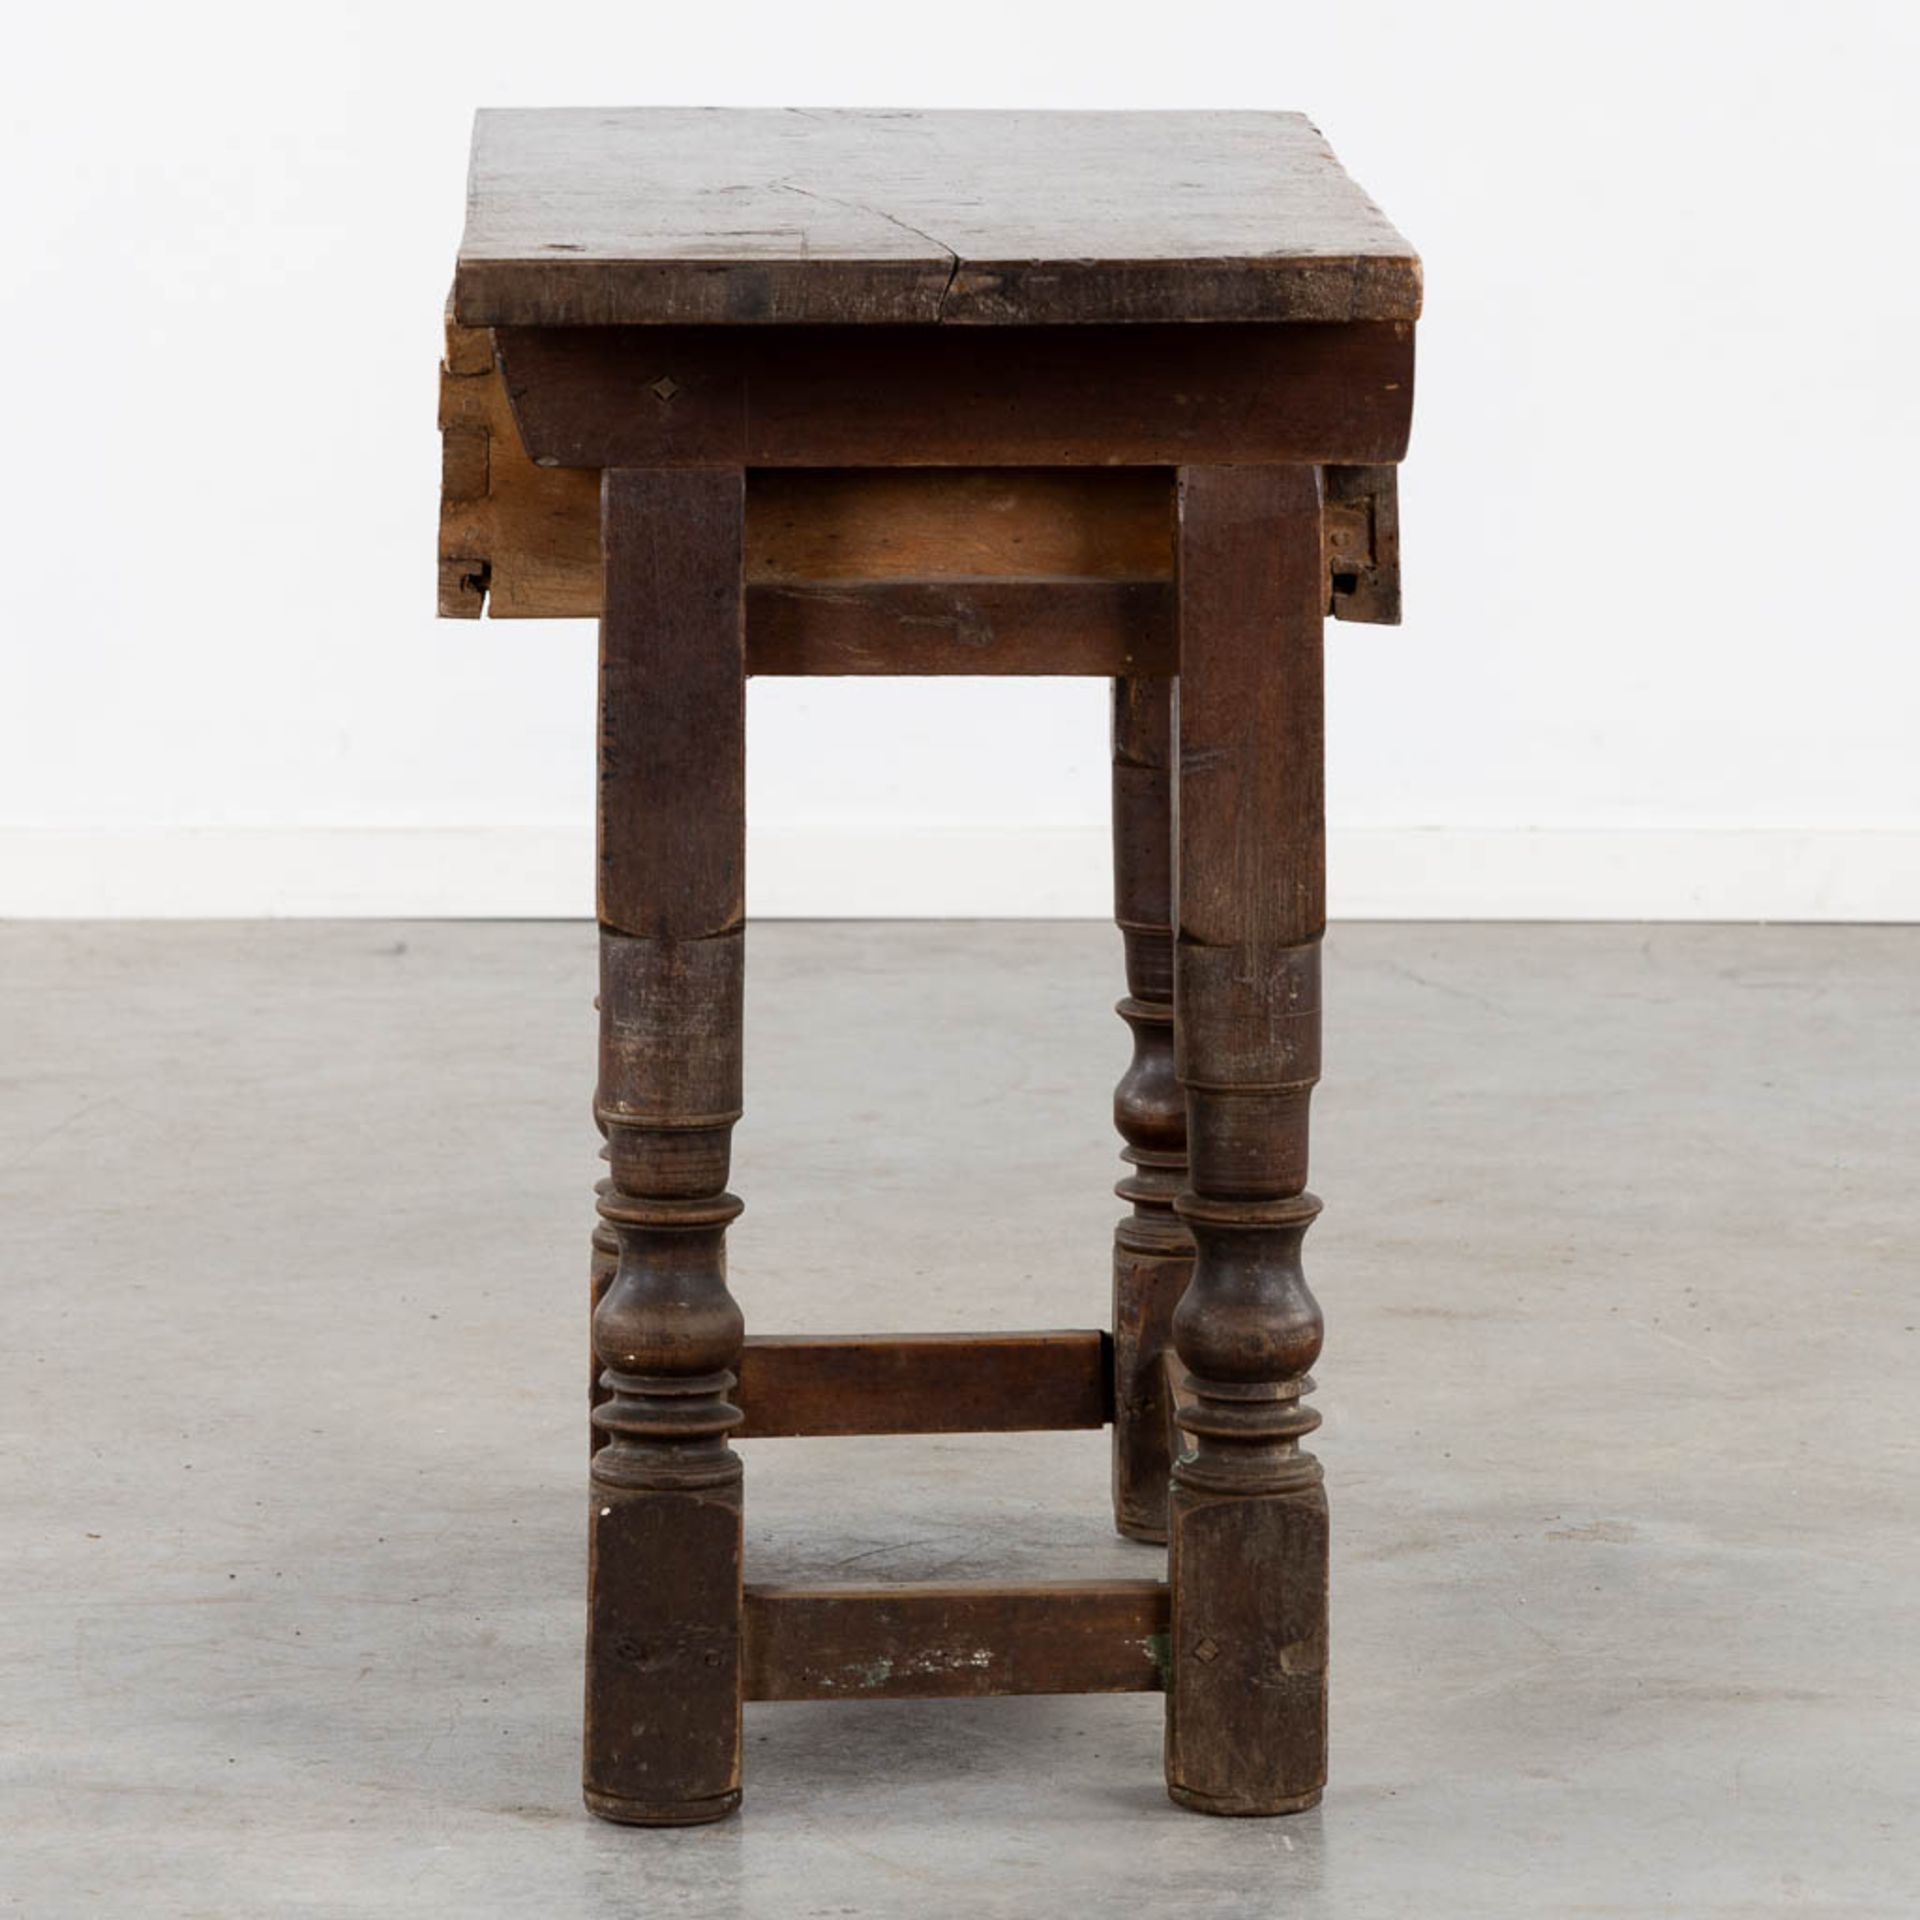 An antique side table, sculptured wood. (L:46 x W:97 x H:76 cm) - Image 7 of 14